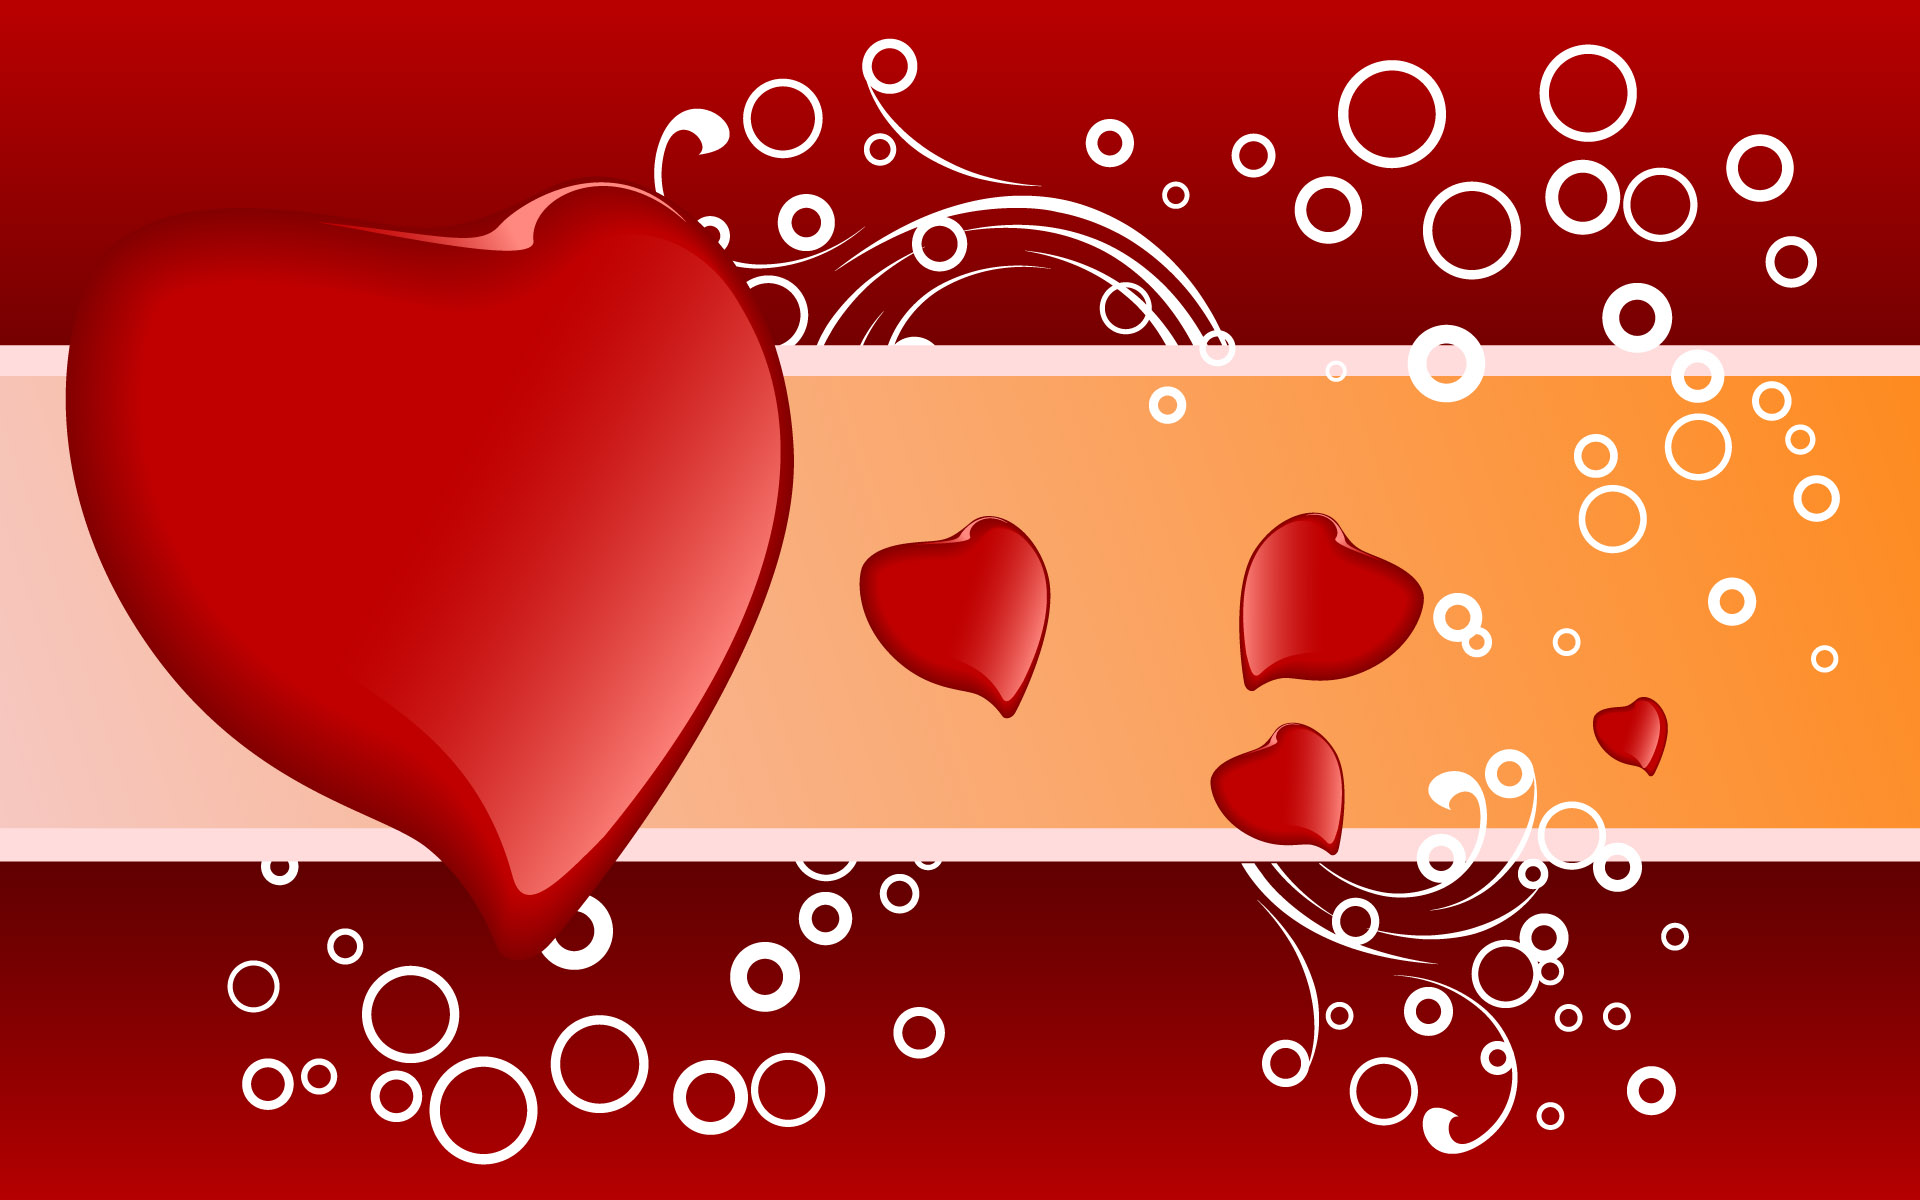 Hearts On Red Background With Circles Backgrounds For PowerPoint - Love PPT Templates